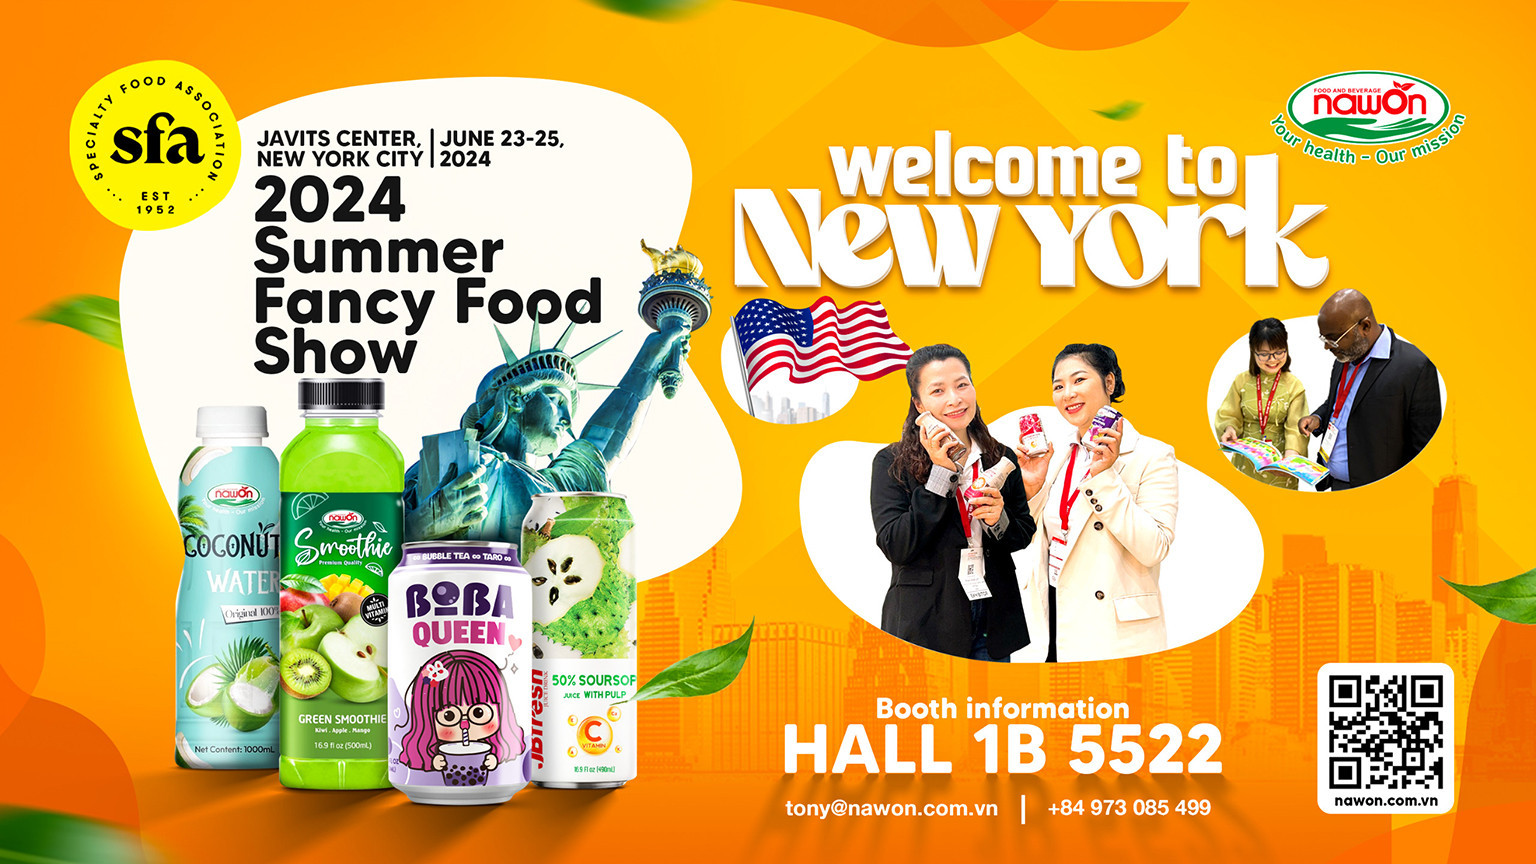 Join nawon at the summer fancy food show 2024